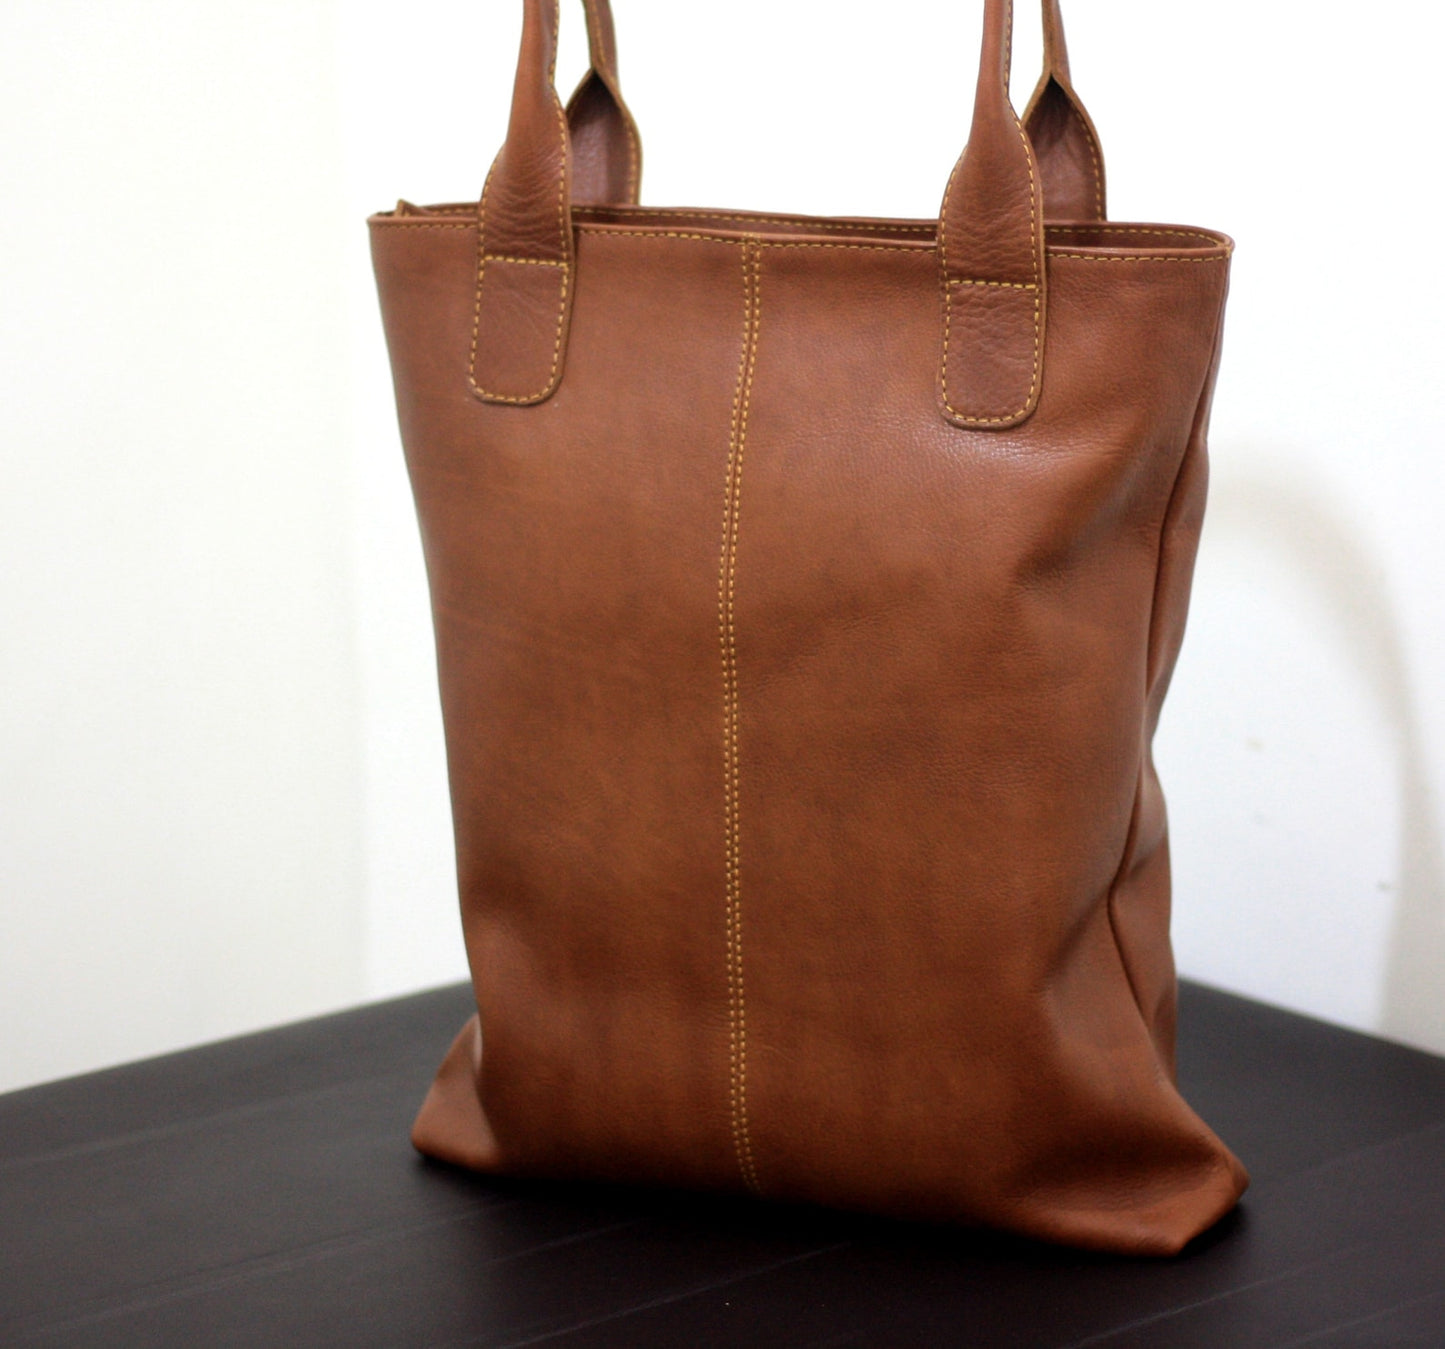 Exotic Leather Tote Bag For Women Zipper Outside Pocket